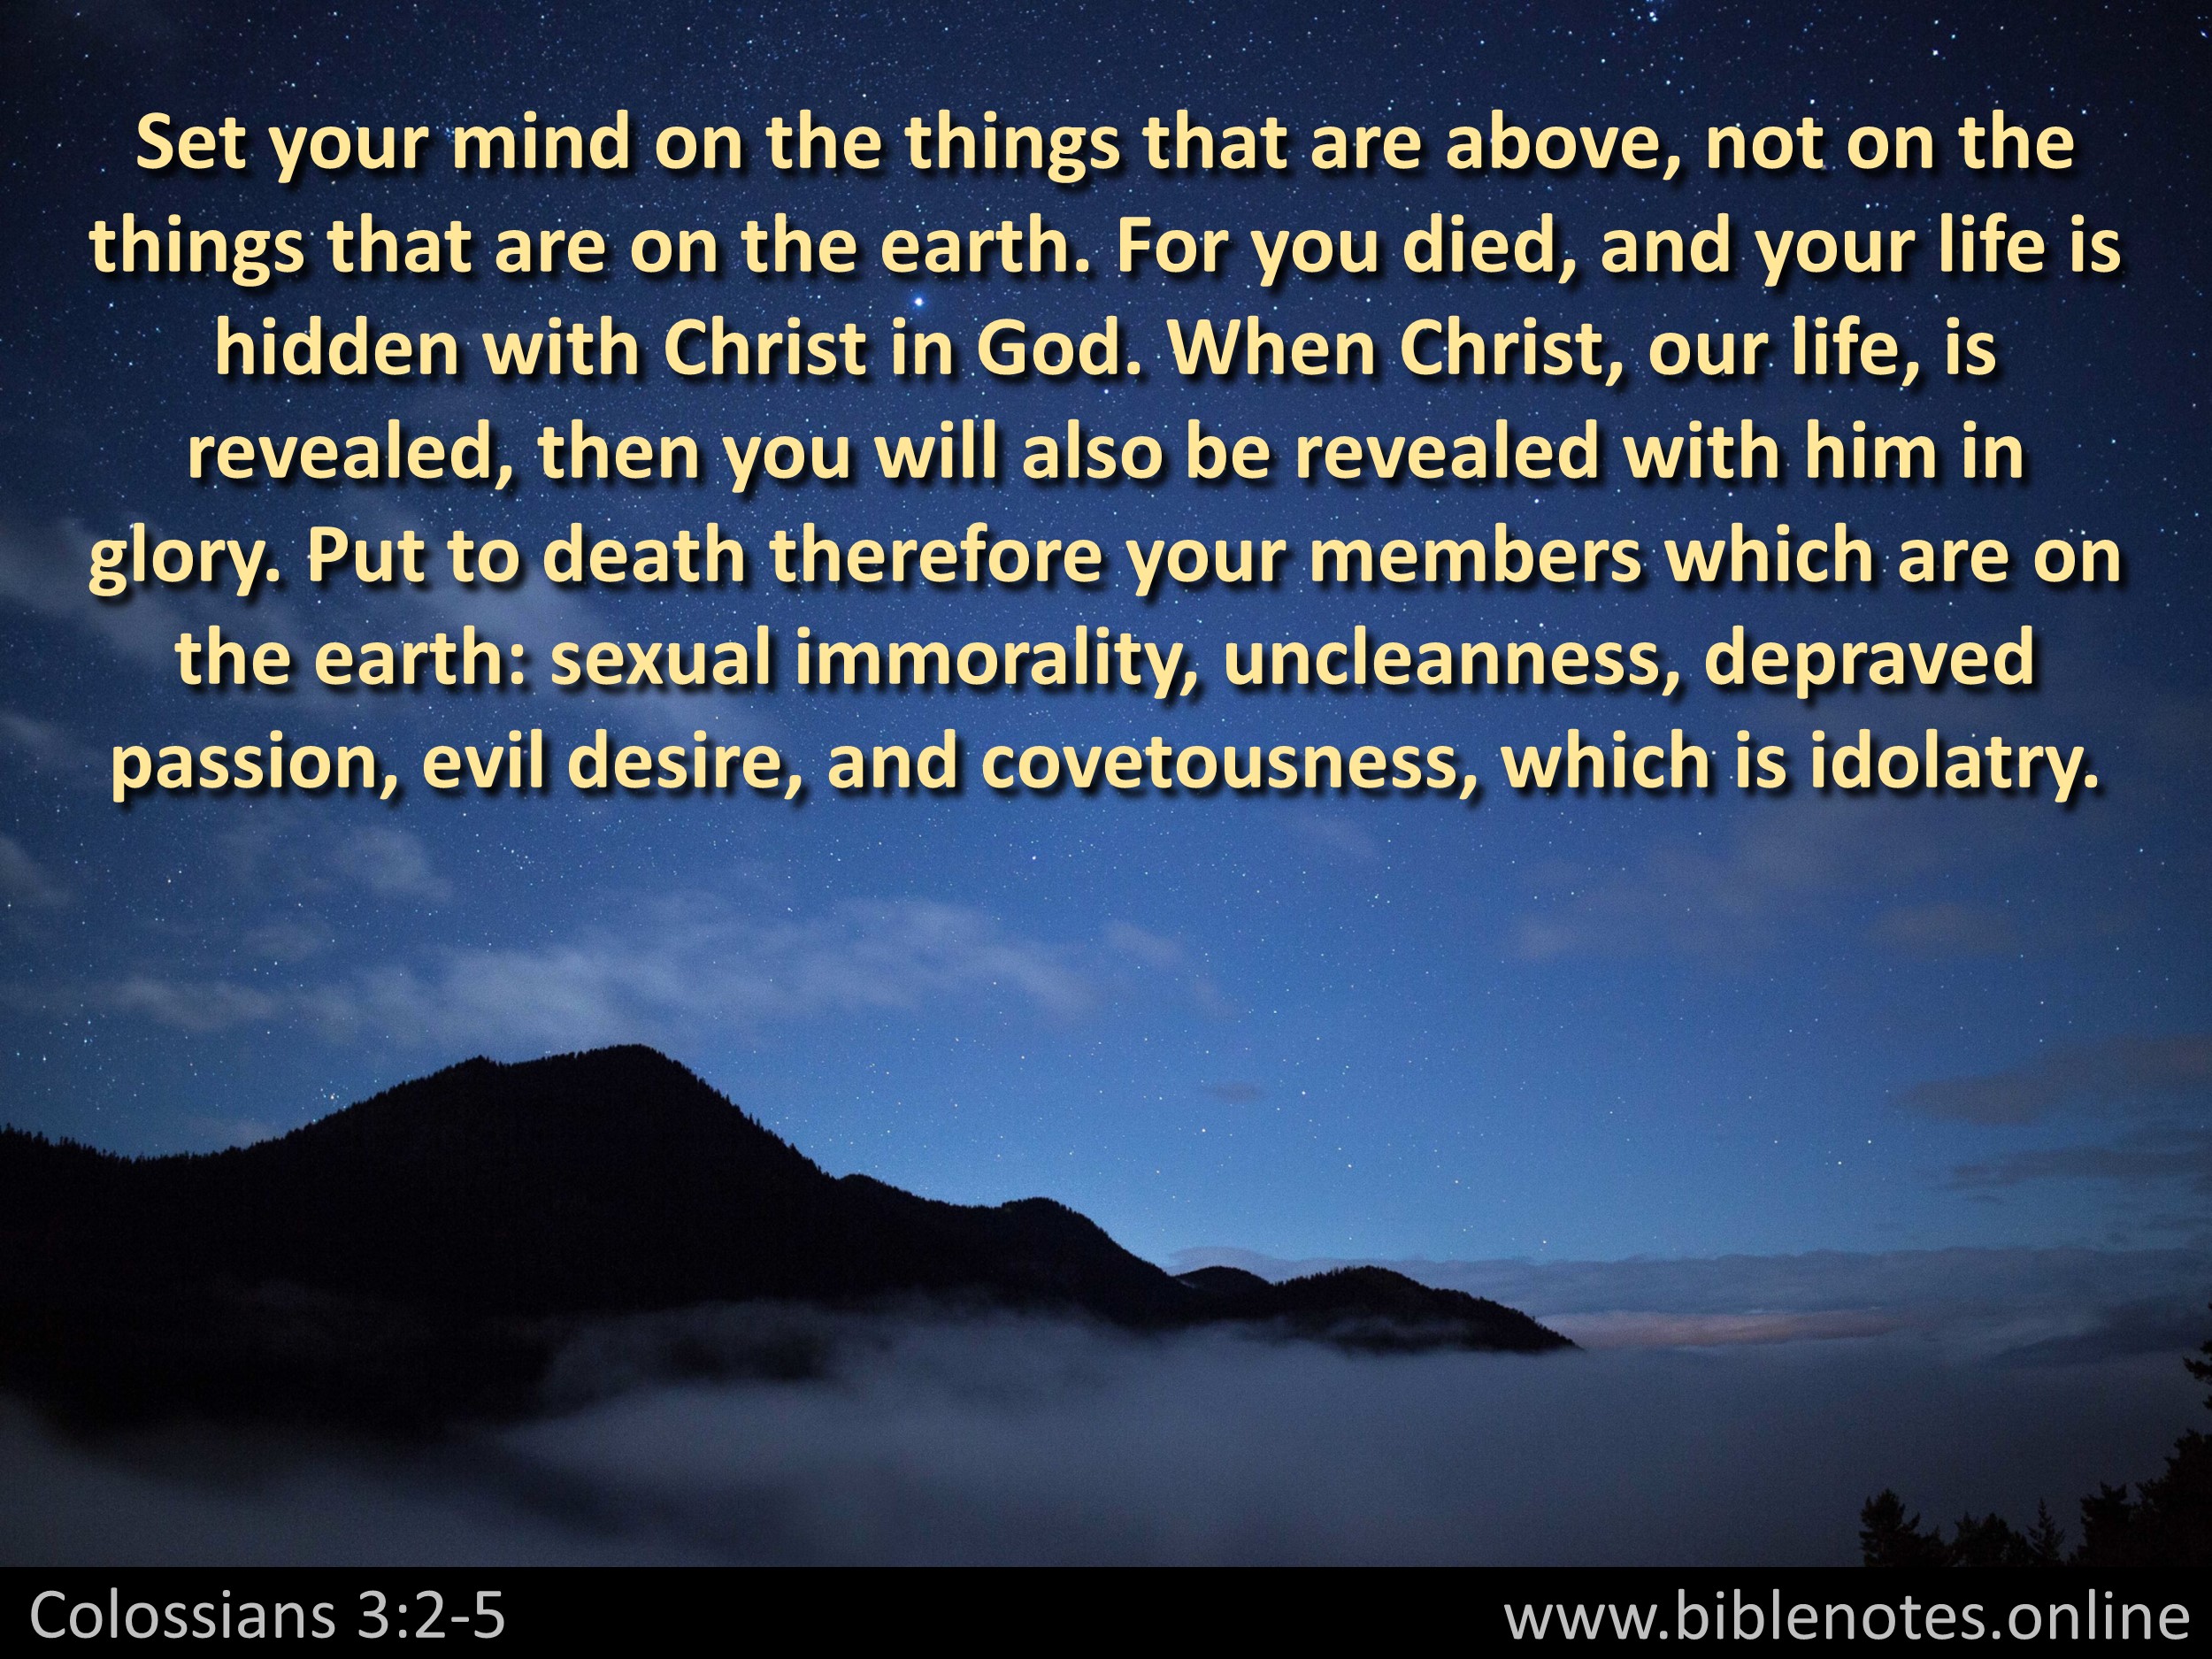 Bible Verse from Colossians Chapter 3